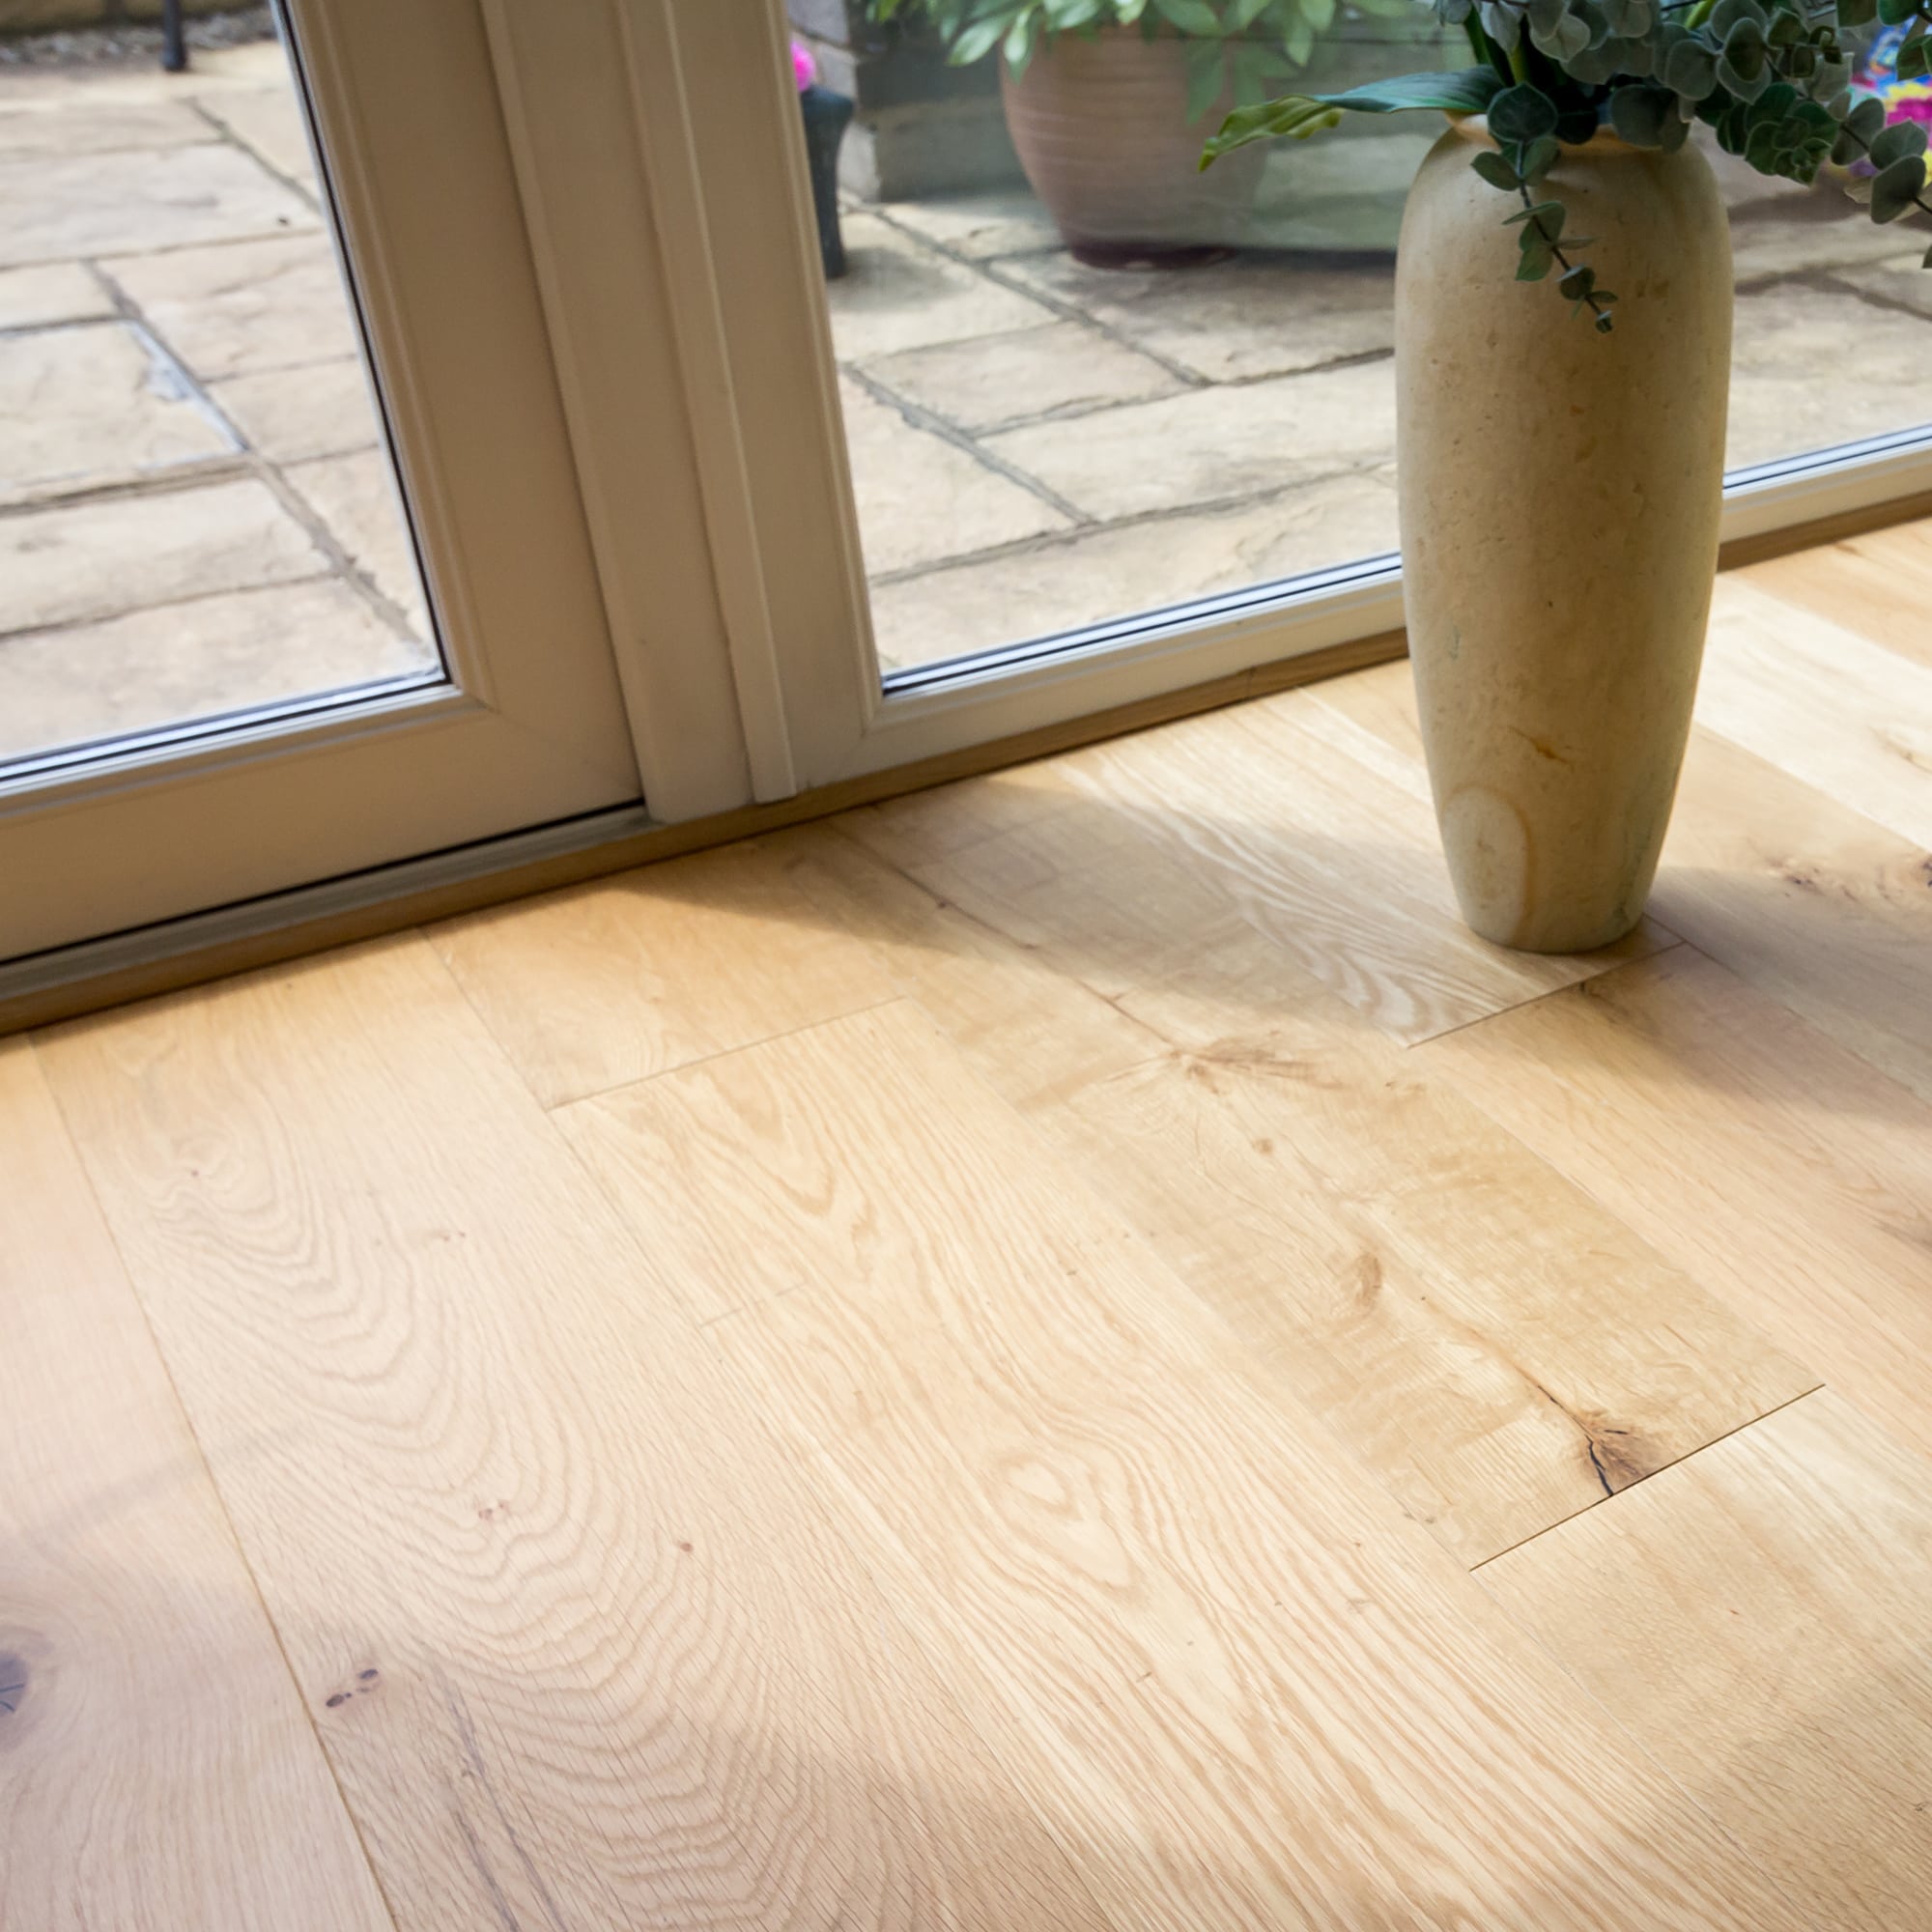 A112 Oak Rustic Oiled - Real Engineered Rustic Oak Wooden Flooring From V4